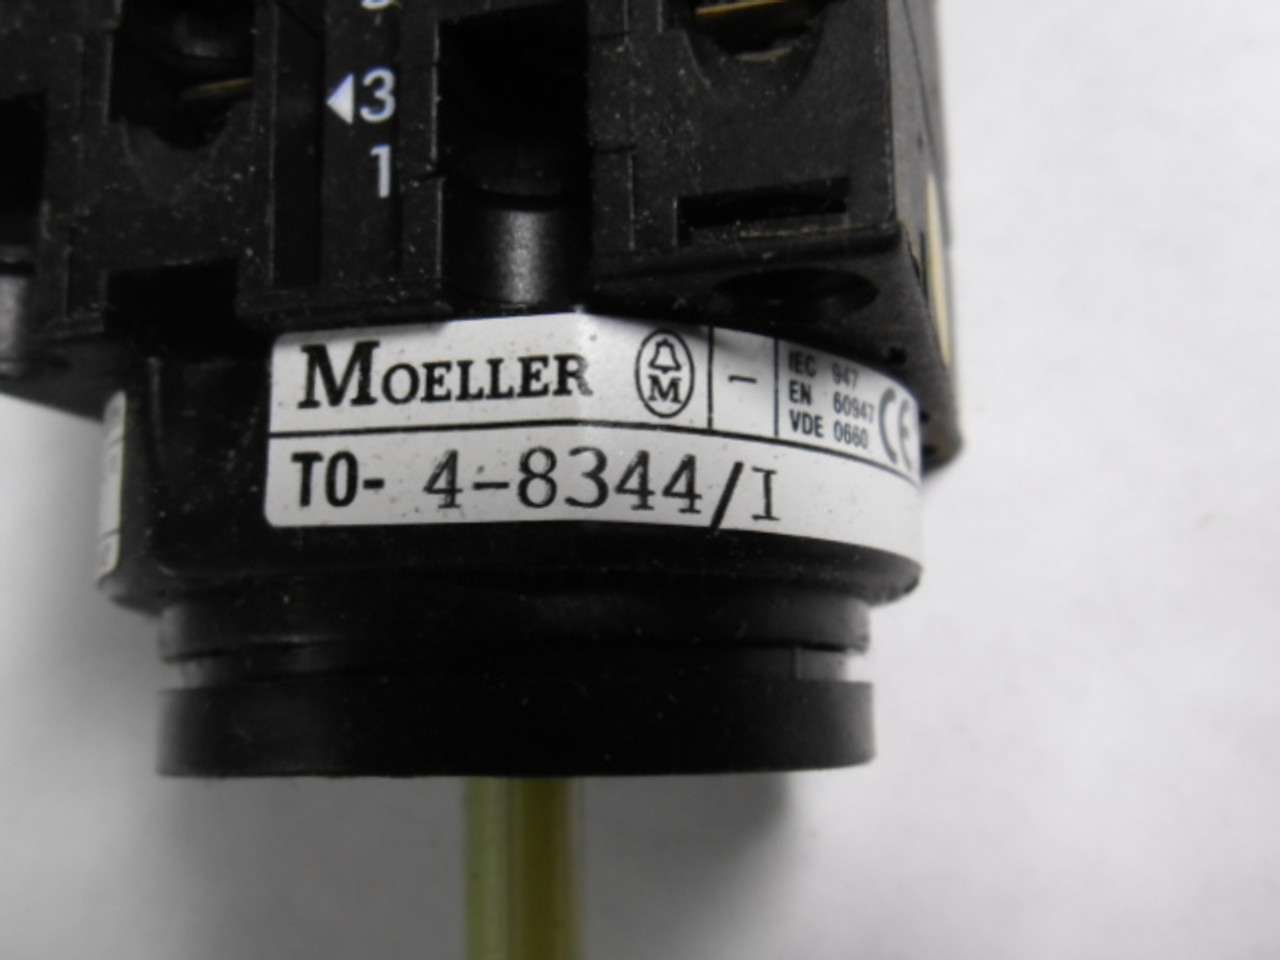 Moeller T0-4-8344/I Rotary Switch 600V AC 14A USED